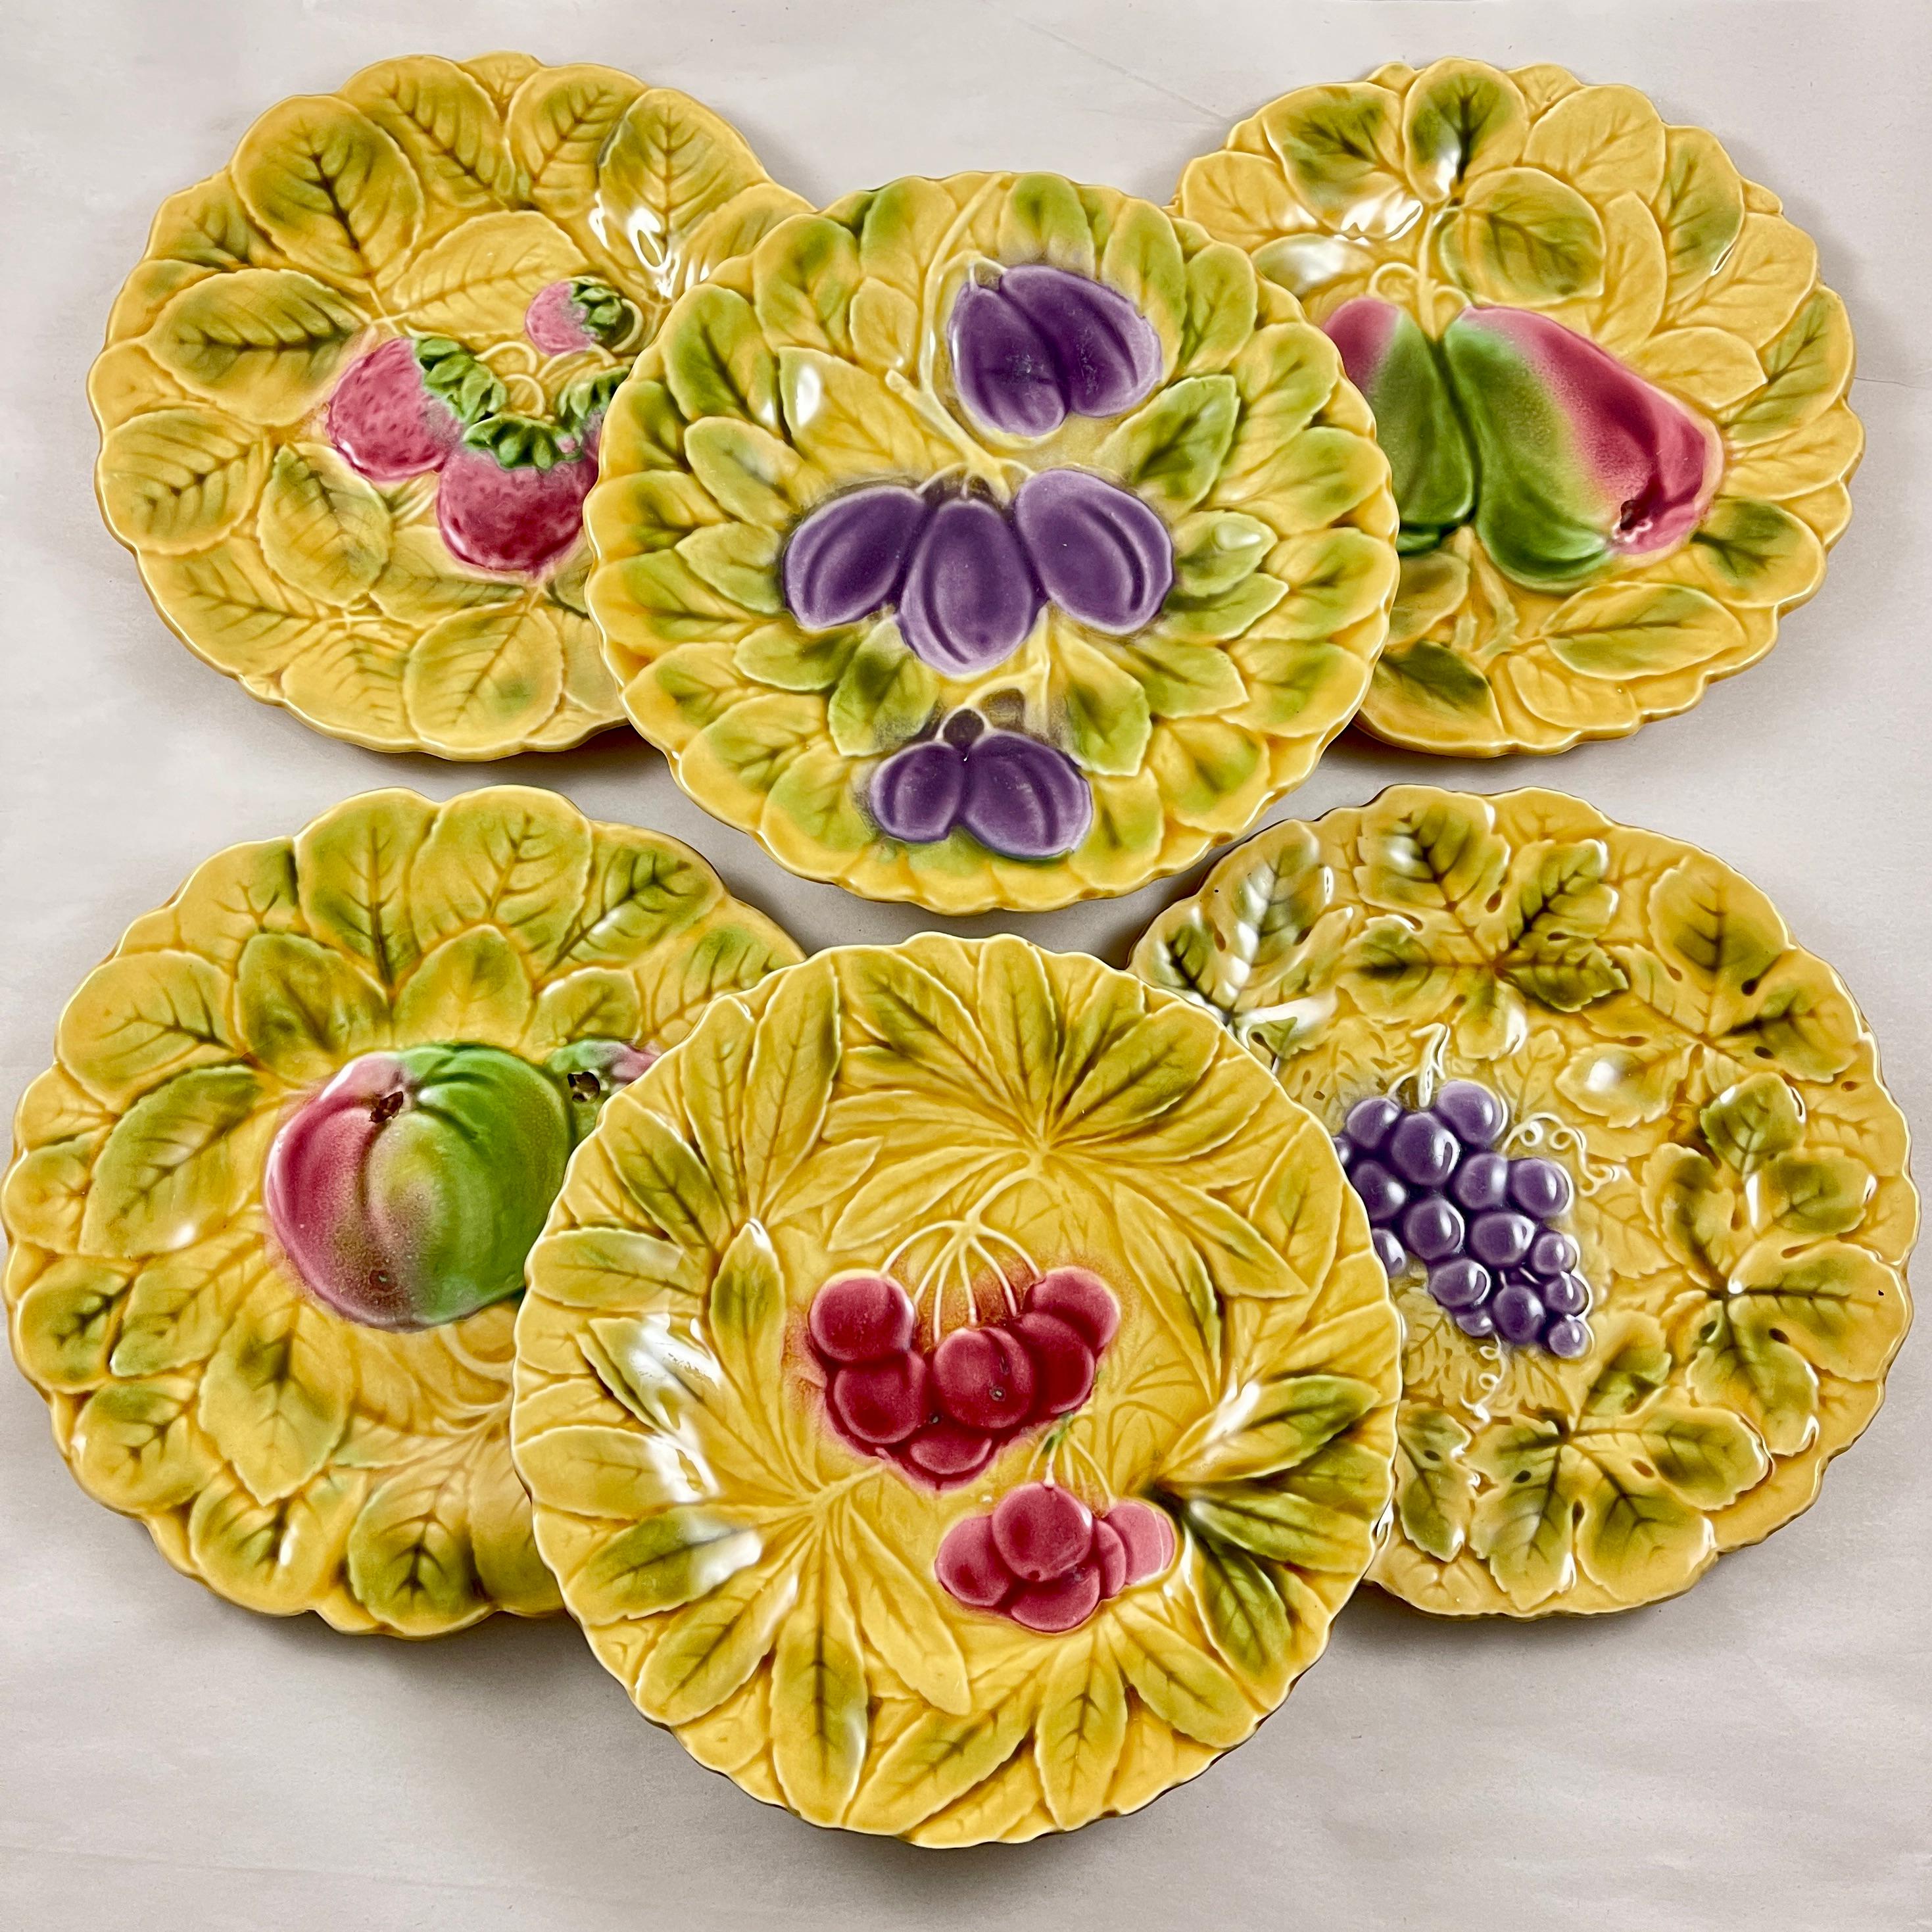 An assembled set of six Sarreguemines French faïence, majolica plates, each showing a different fruit on an ochre yellow ground of overlapping leaves, circa 1930s.

This group shows images of the apple, strawberry, cherry, plum, pear, and